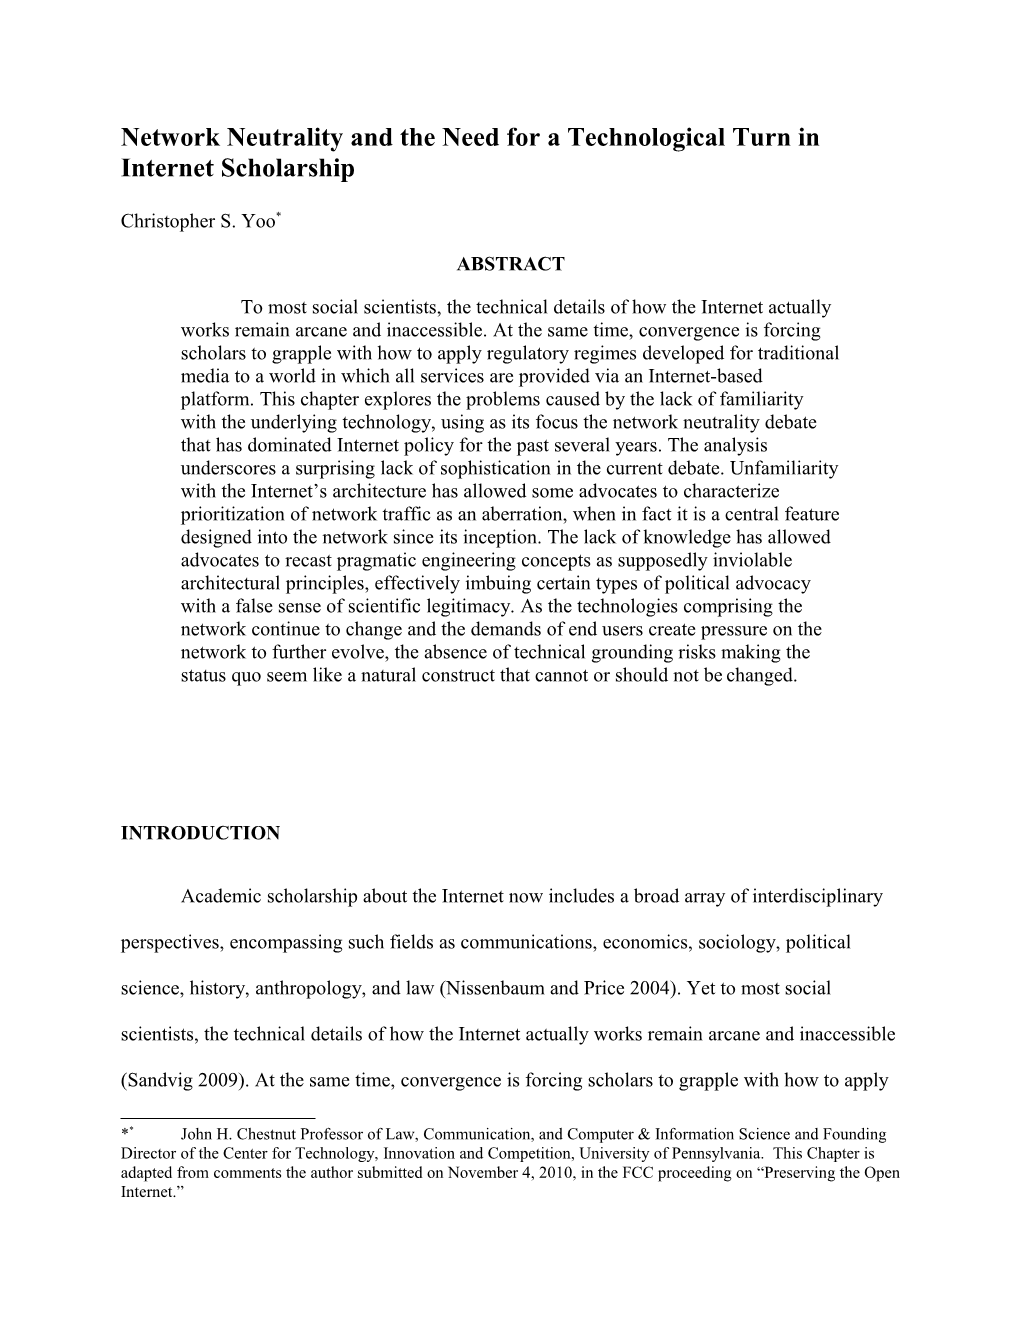 Network Neutrality and the Need for a Technological Turn in Internet Scholarship